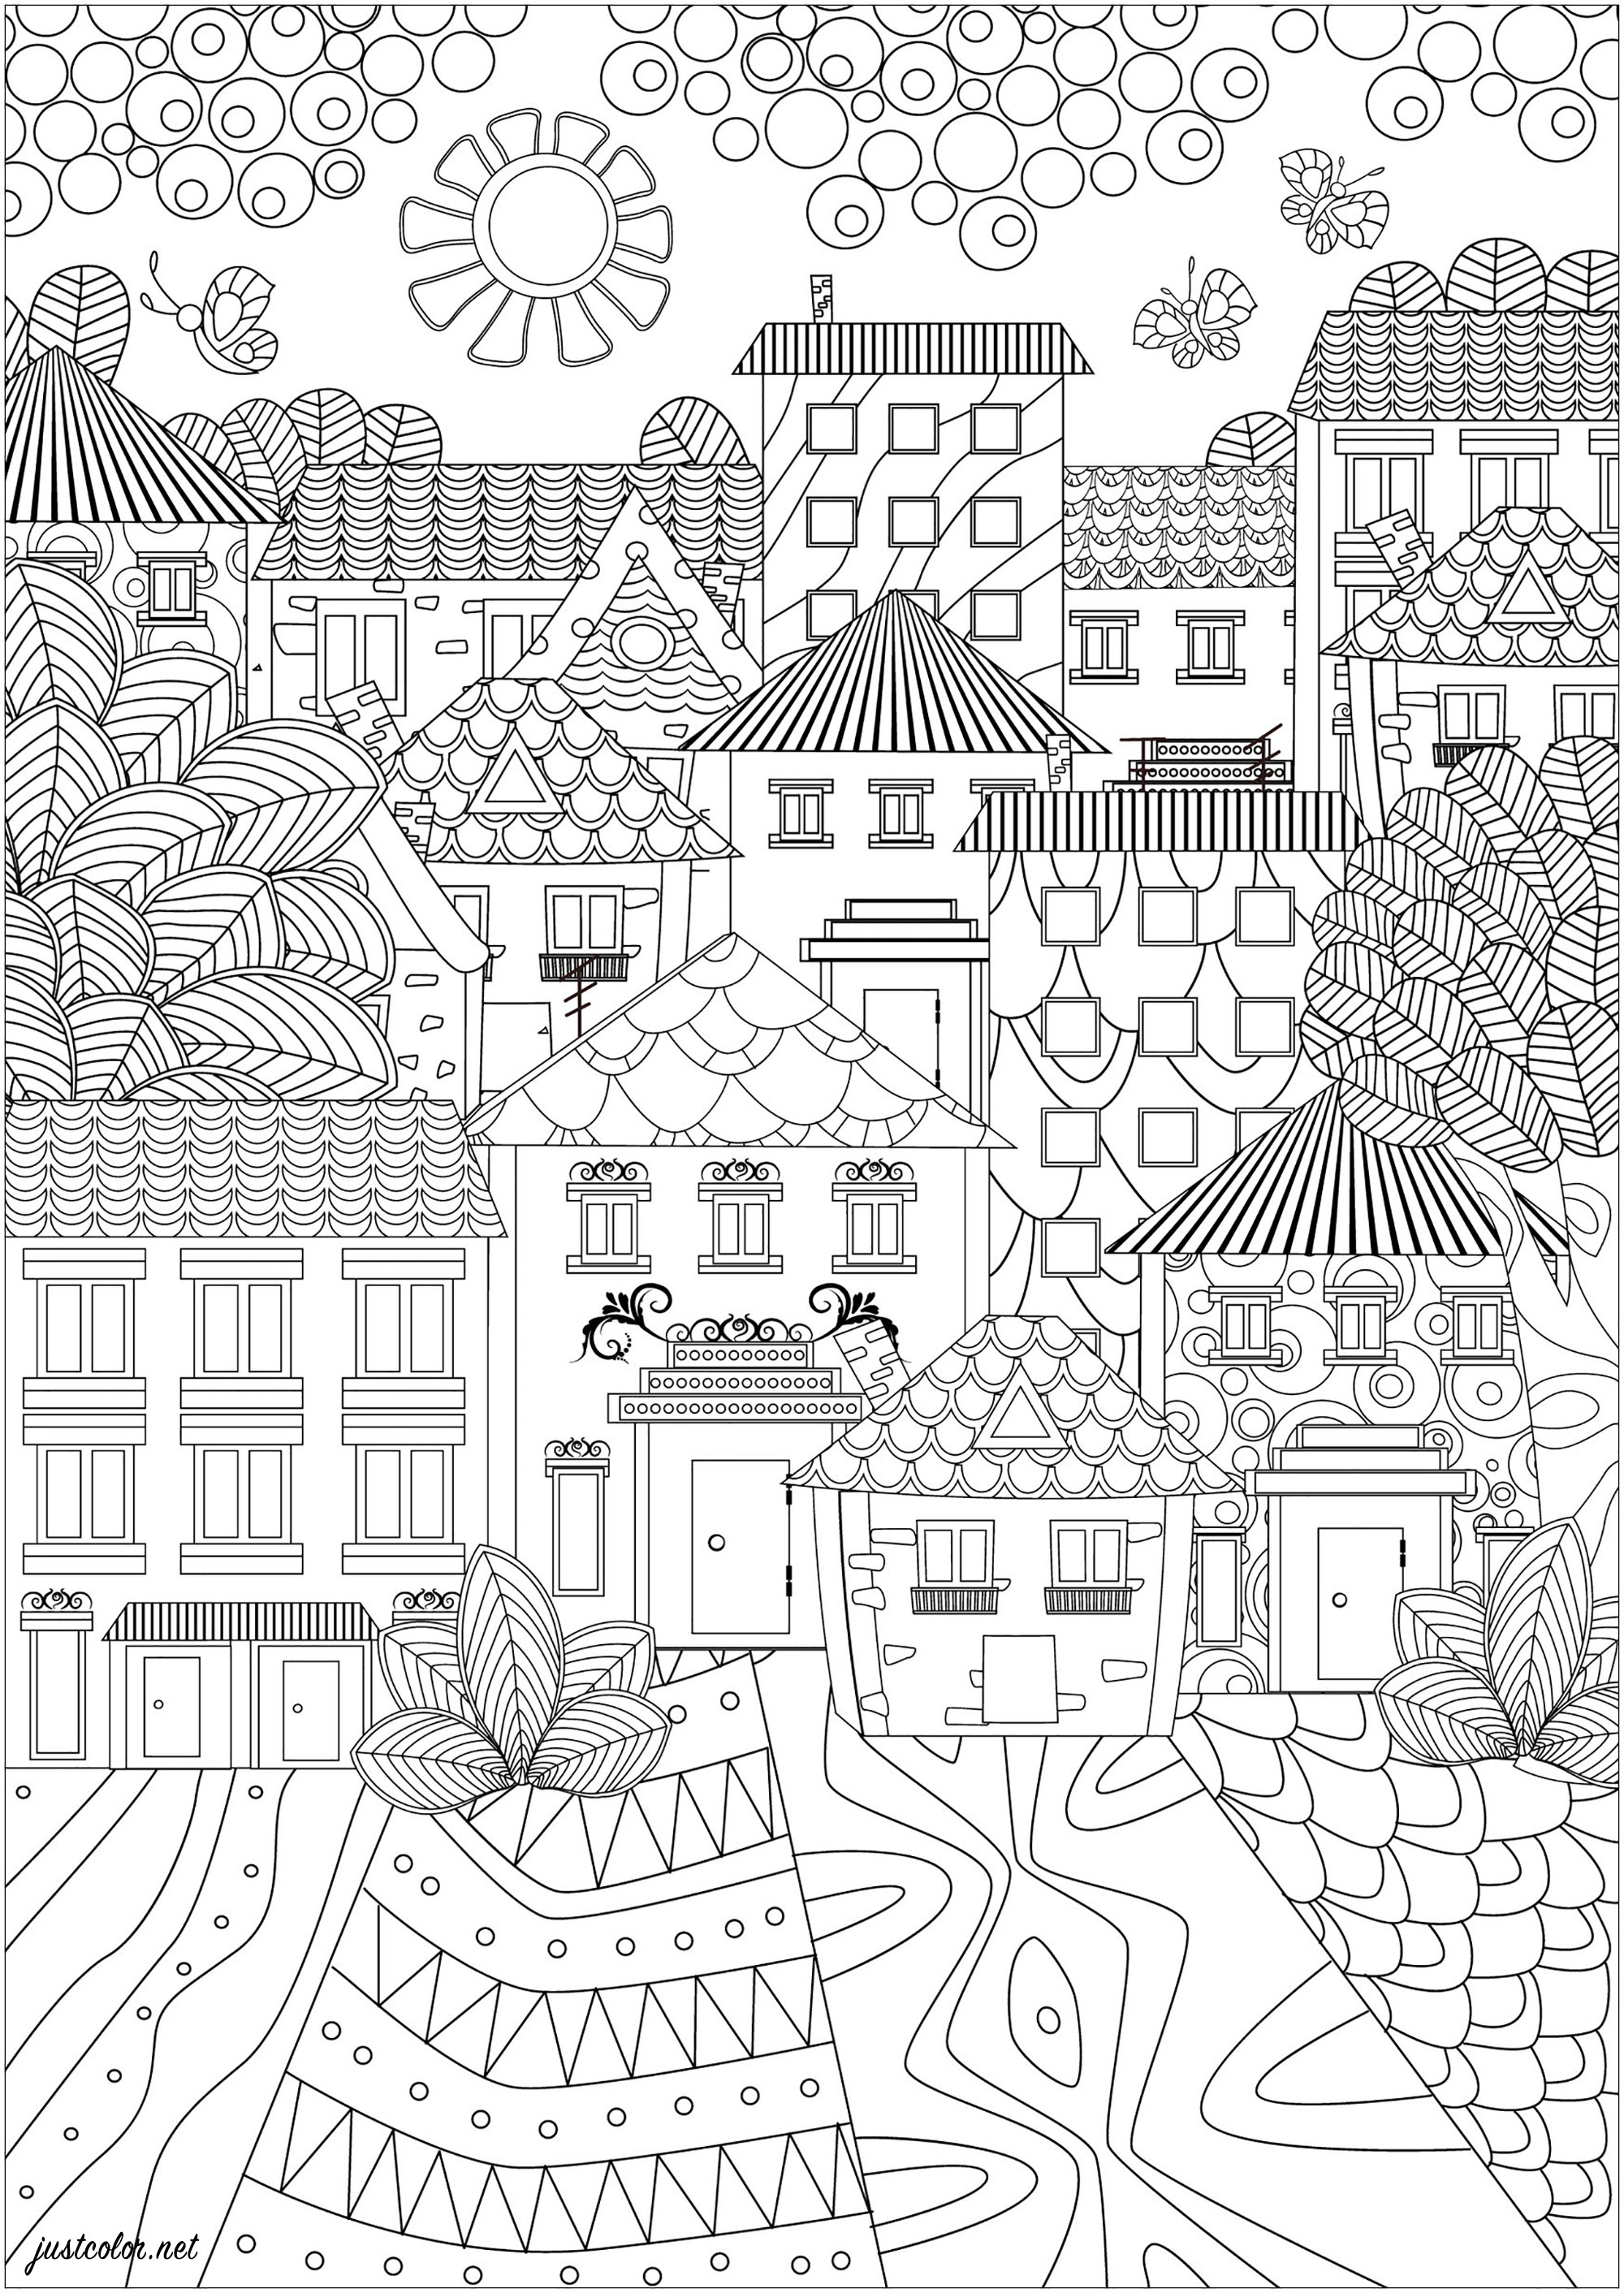 A city of beautiful houses with simple and elegant designs. This coloring page is a very simple and elegant cityscape. It shows a city made up of pretty houses with simple and elegant designs. The roofs are pointed and the windows are small and nicely decorated. The streets are paved with patterns that will be very pleasant to color, Source : 123rf   Artist : Ksym